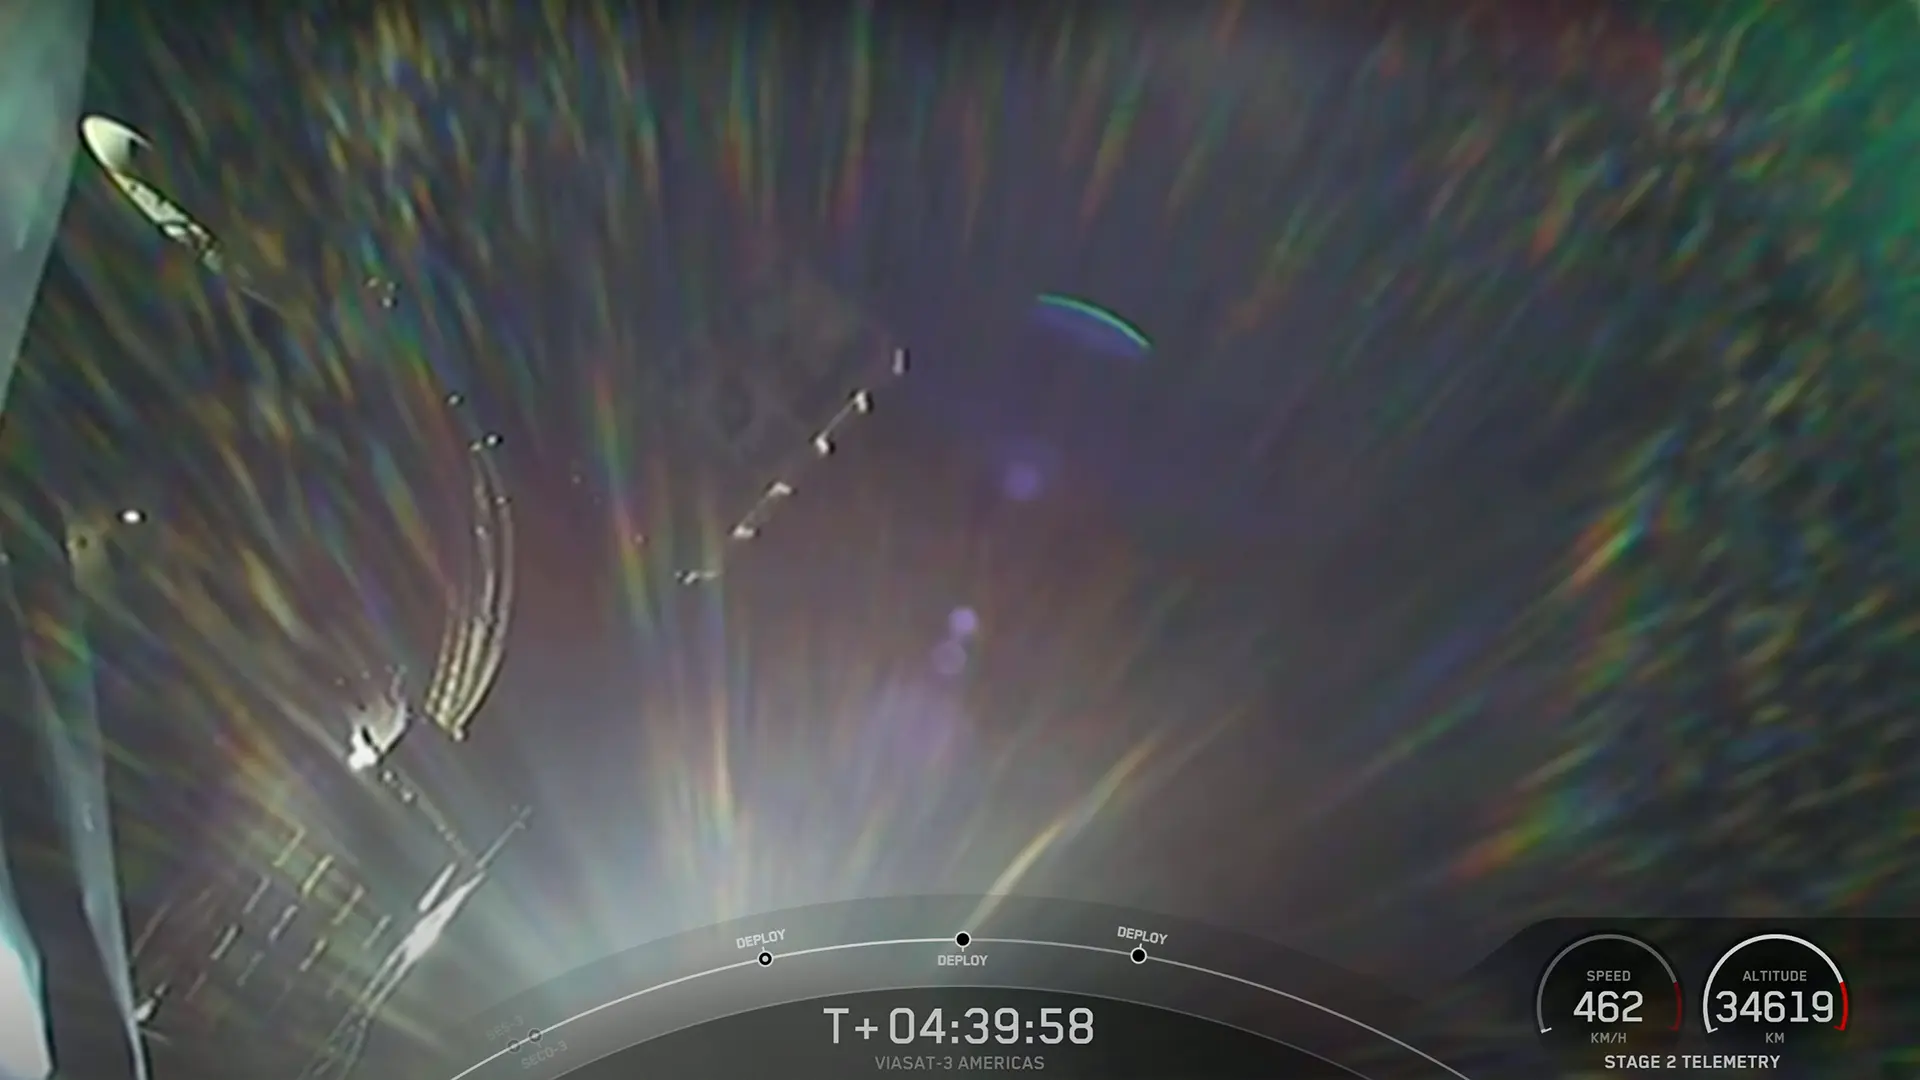 Gravity Space GS-1 Deployment;
© SpaceX Livestream